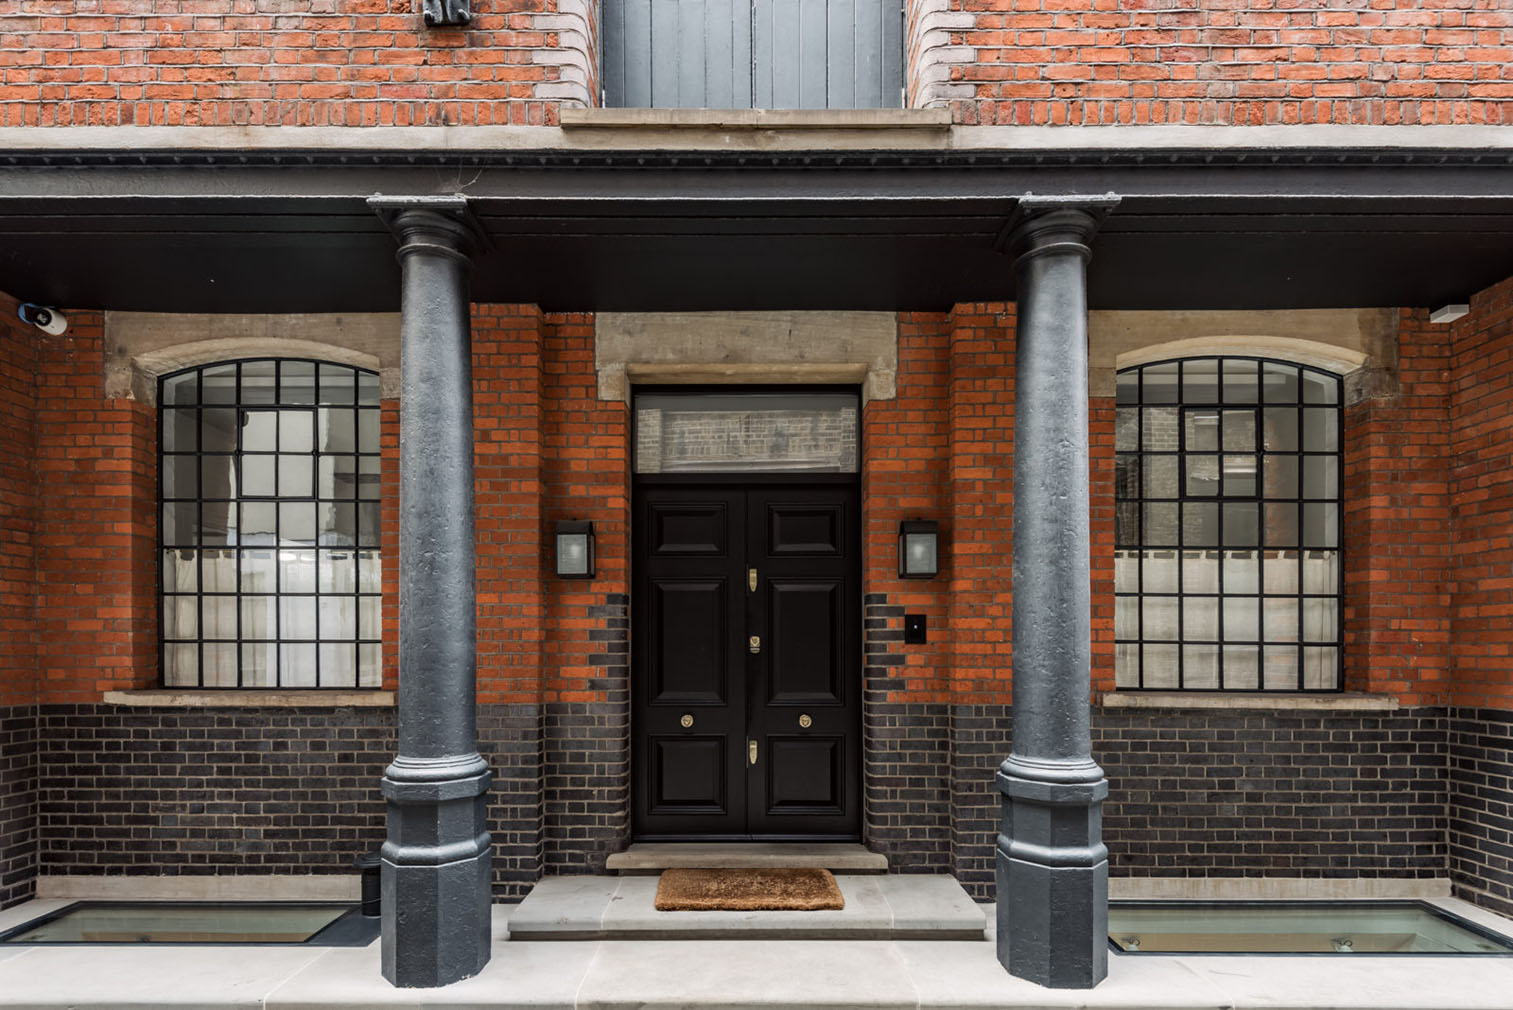 The cooperage scooped a 2017 RIBA award for its masterful blending of old and new, and now the Clerkenwell property is on the market via The Modern House for £7.25m.